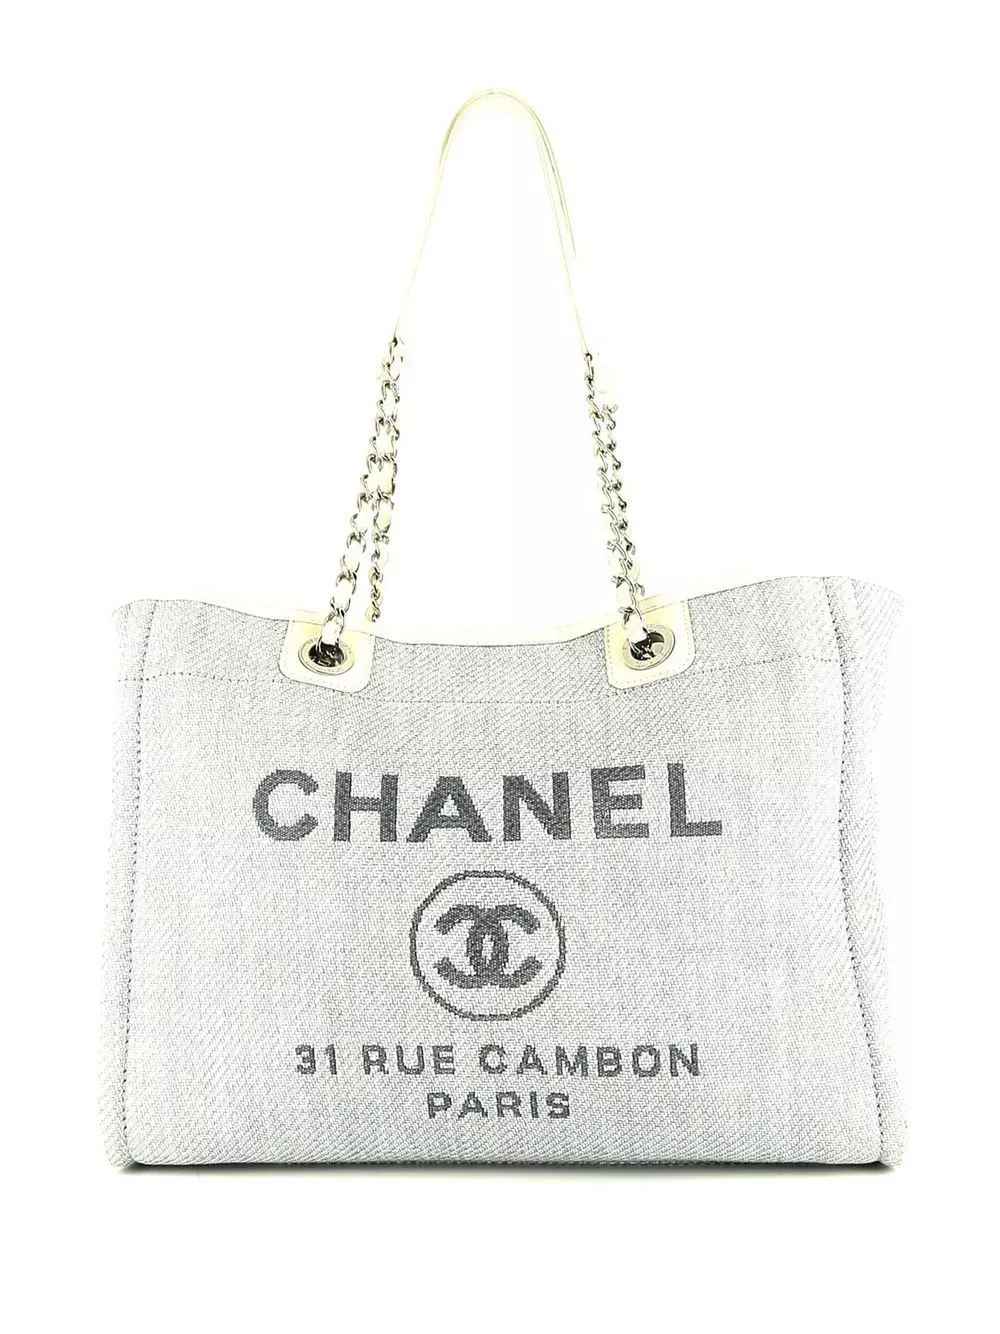 Authenticated Chanel Deauville Tote Brown Beige Canvas Fabric Bag